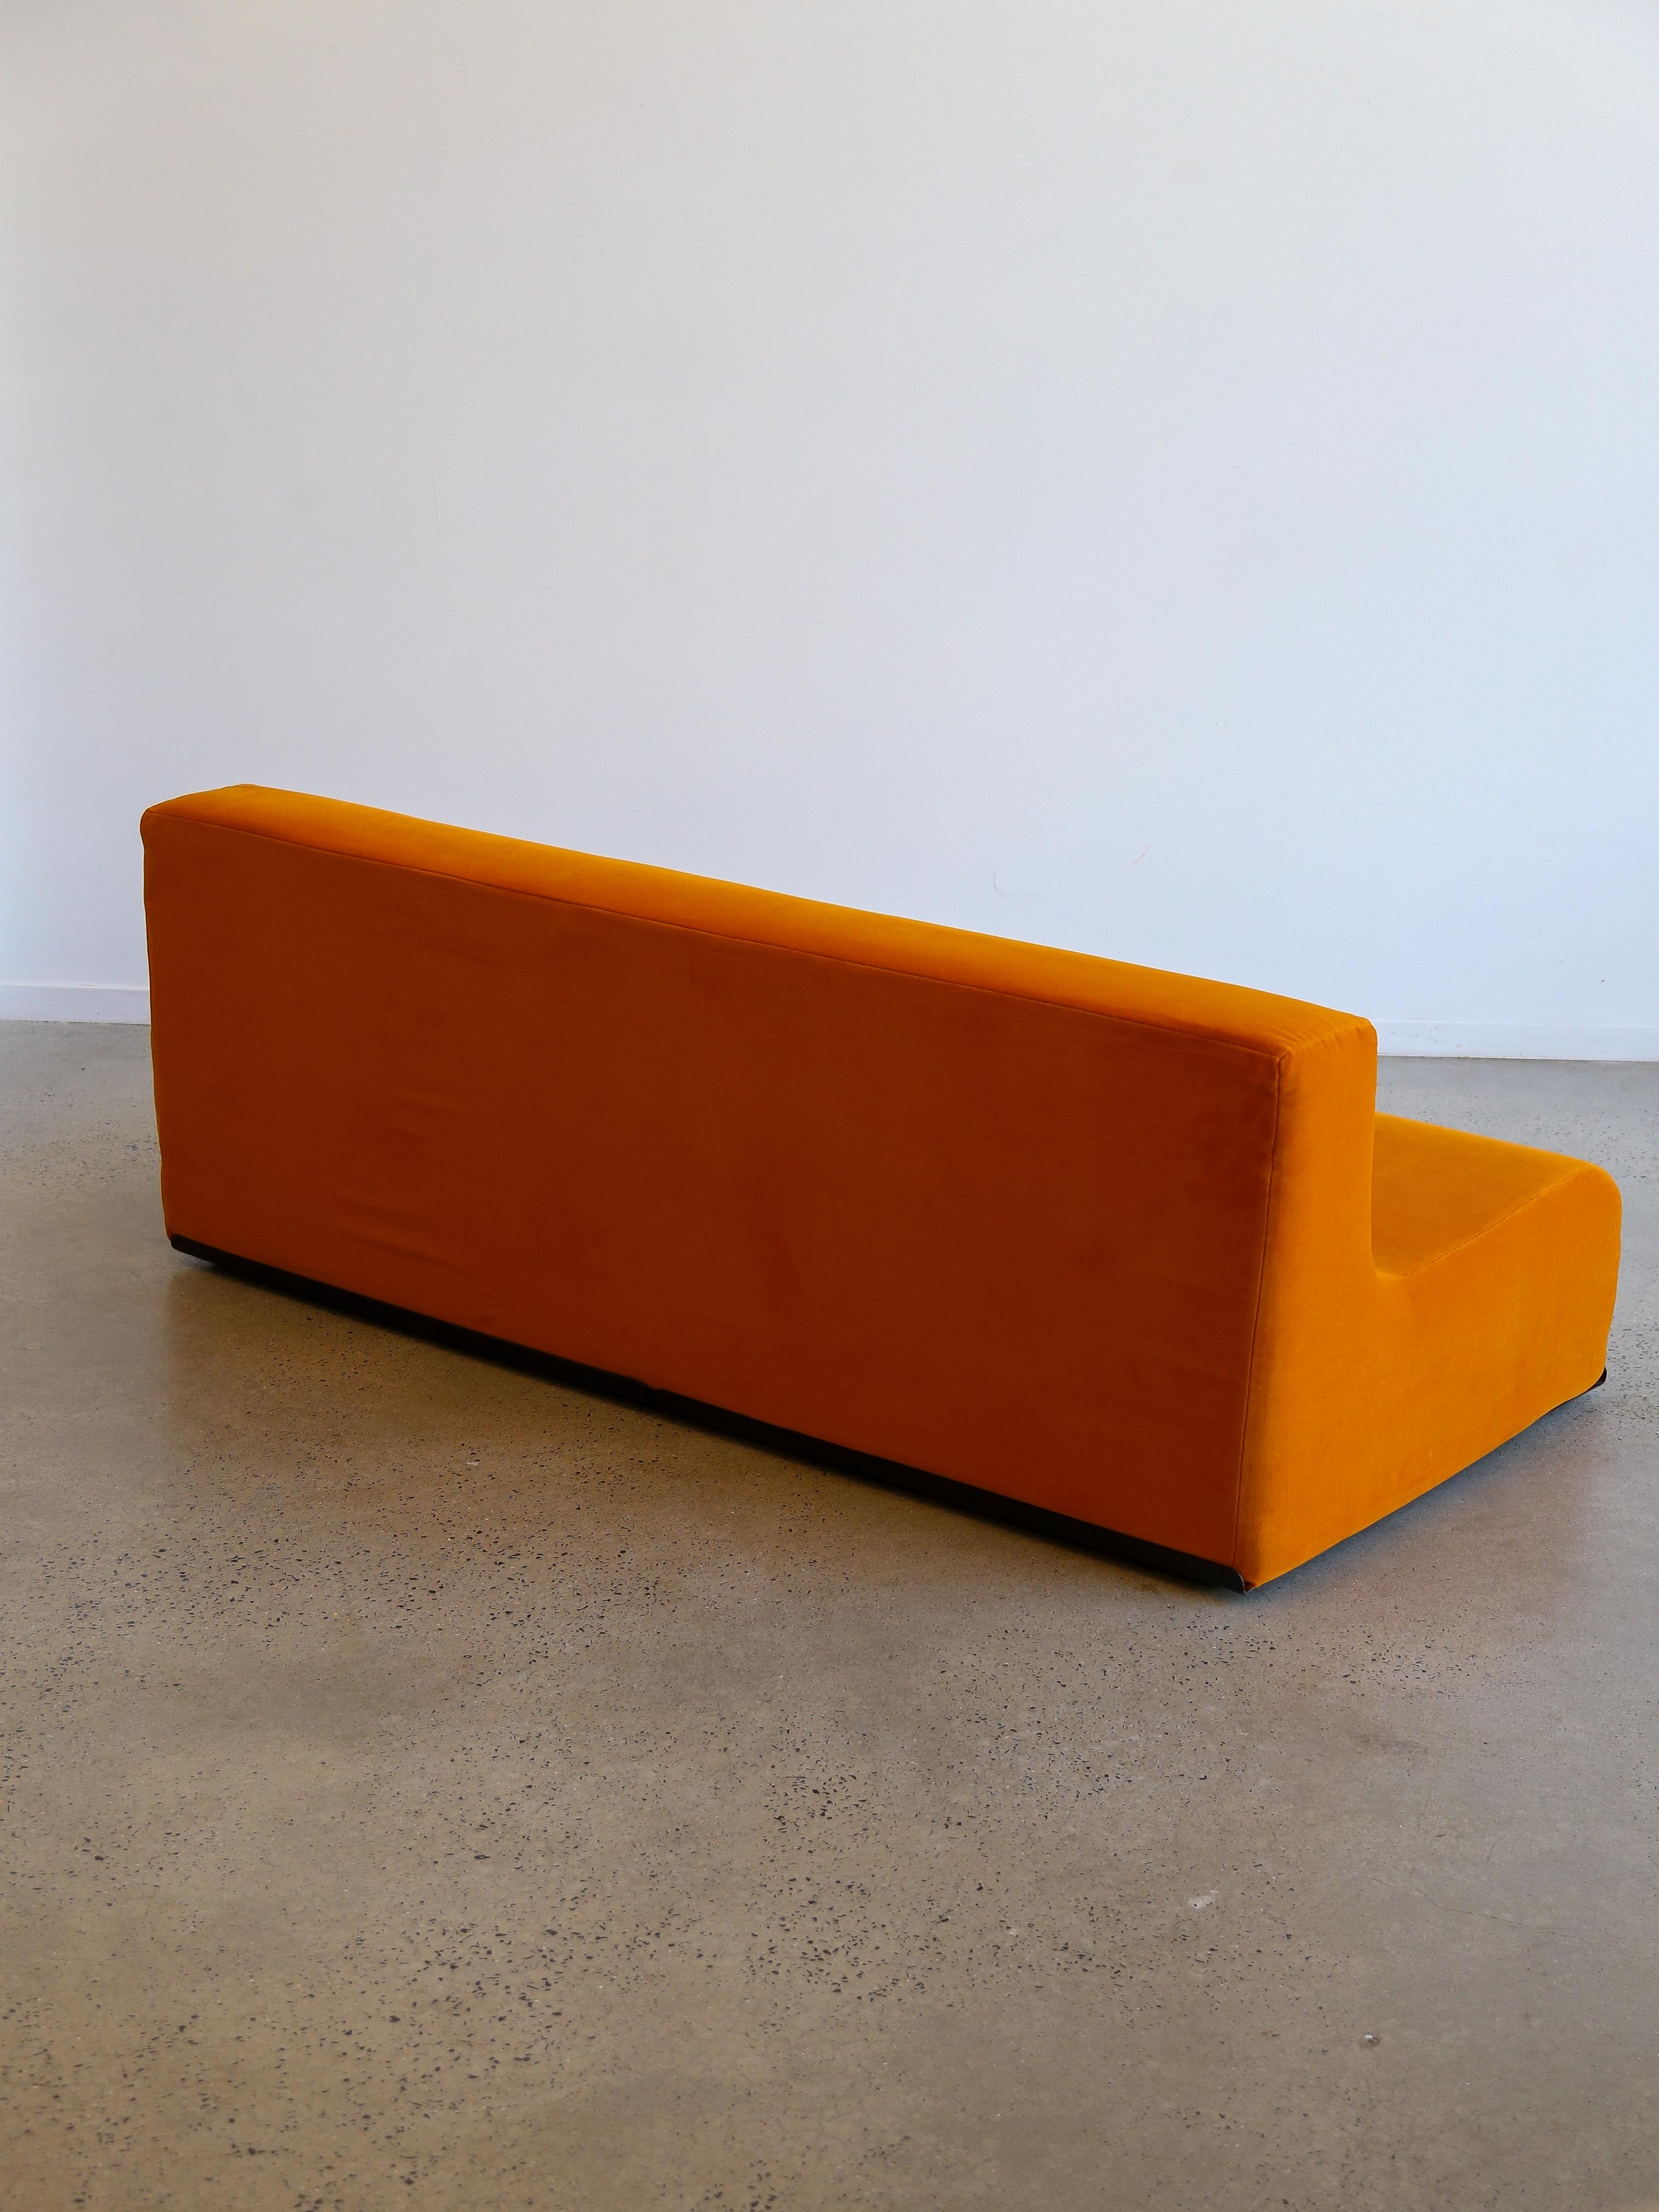 Space Age Three Seater Orange Sofa In Good Condition For Sale In Byron Bay, NSW